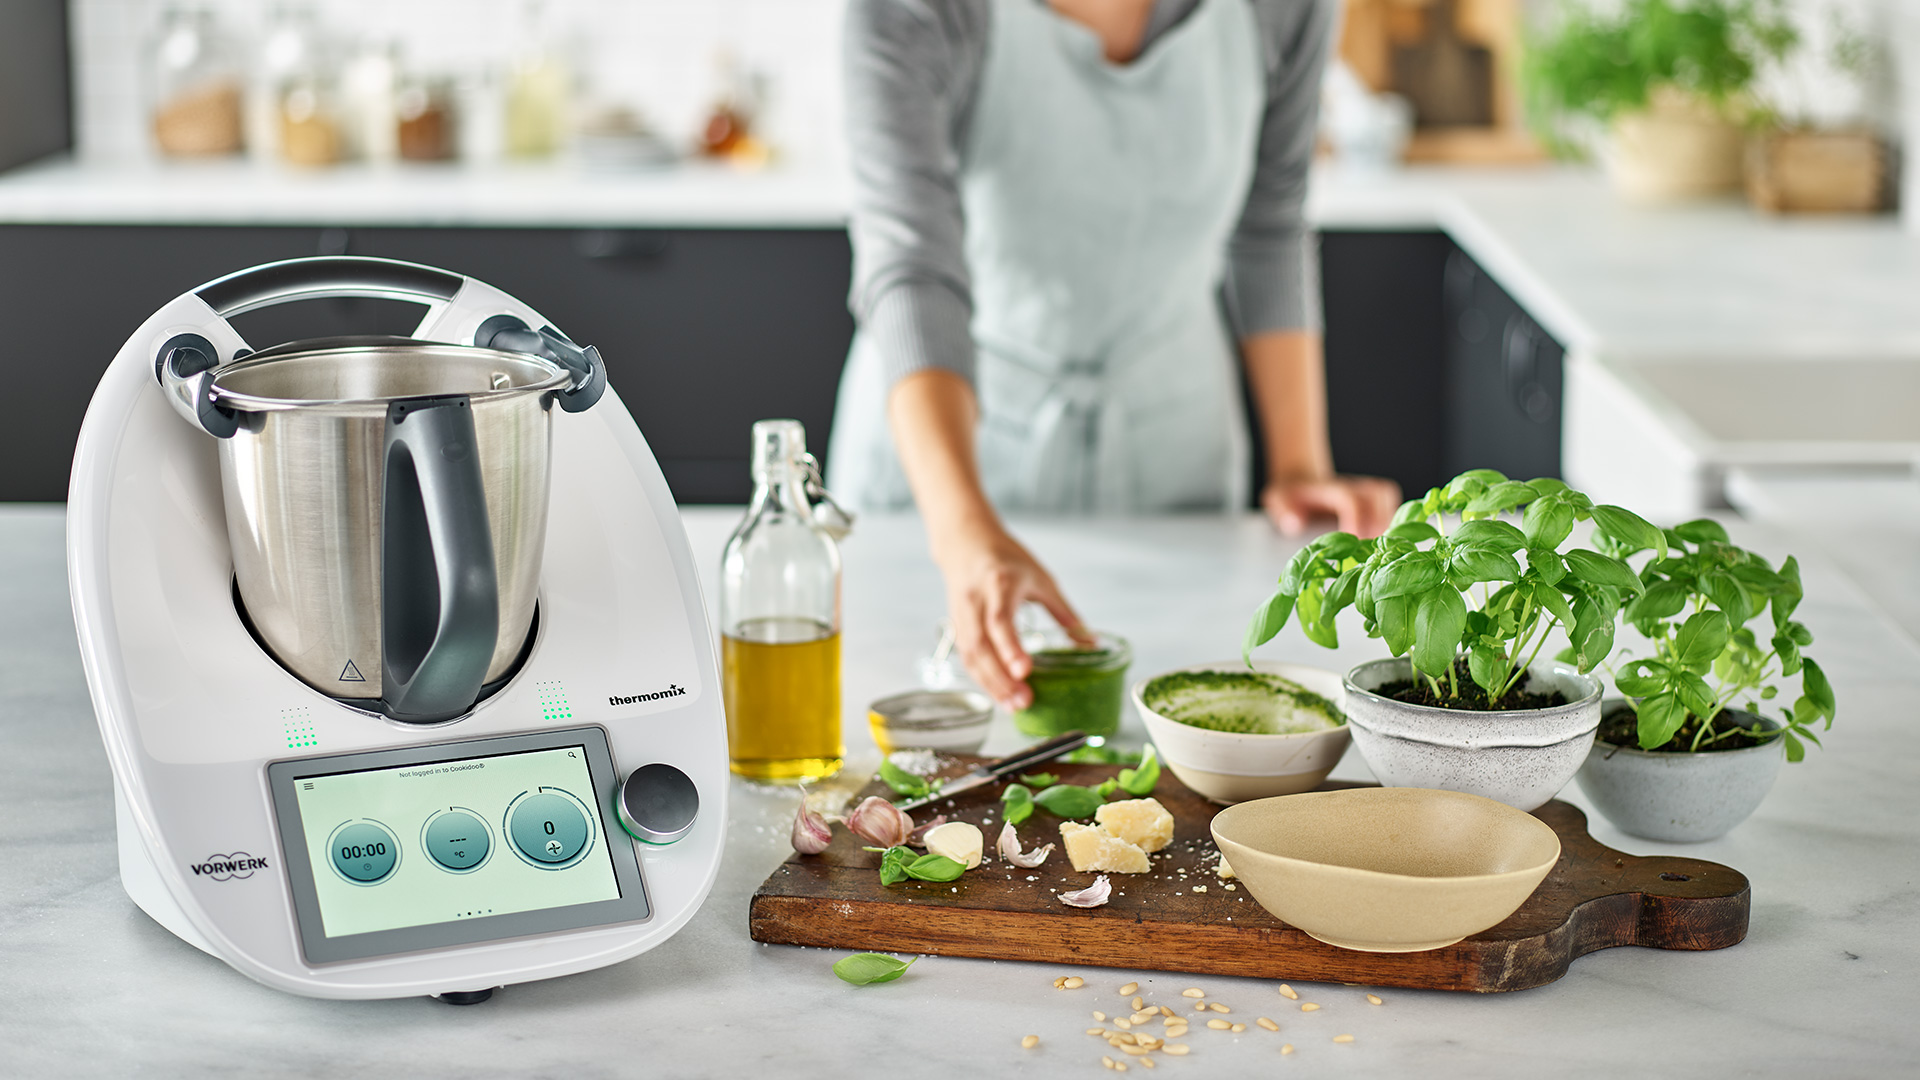 What is Thermomix?